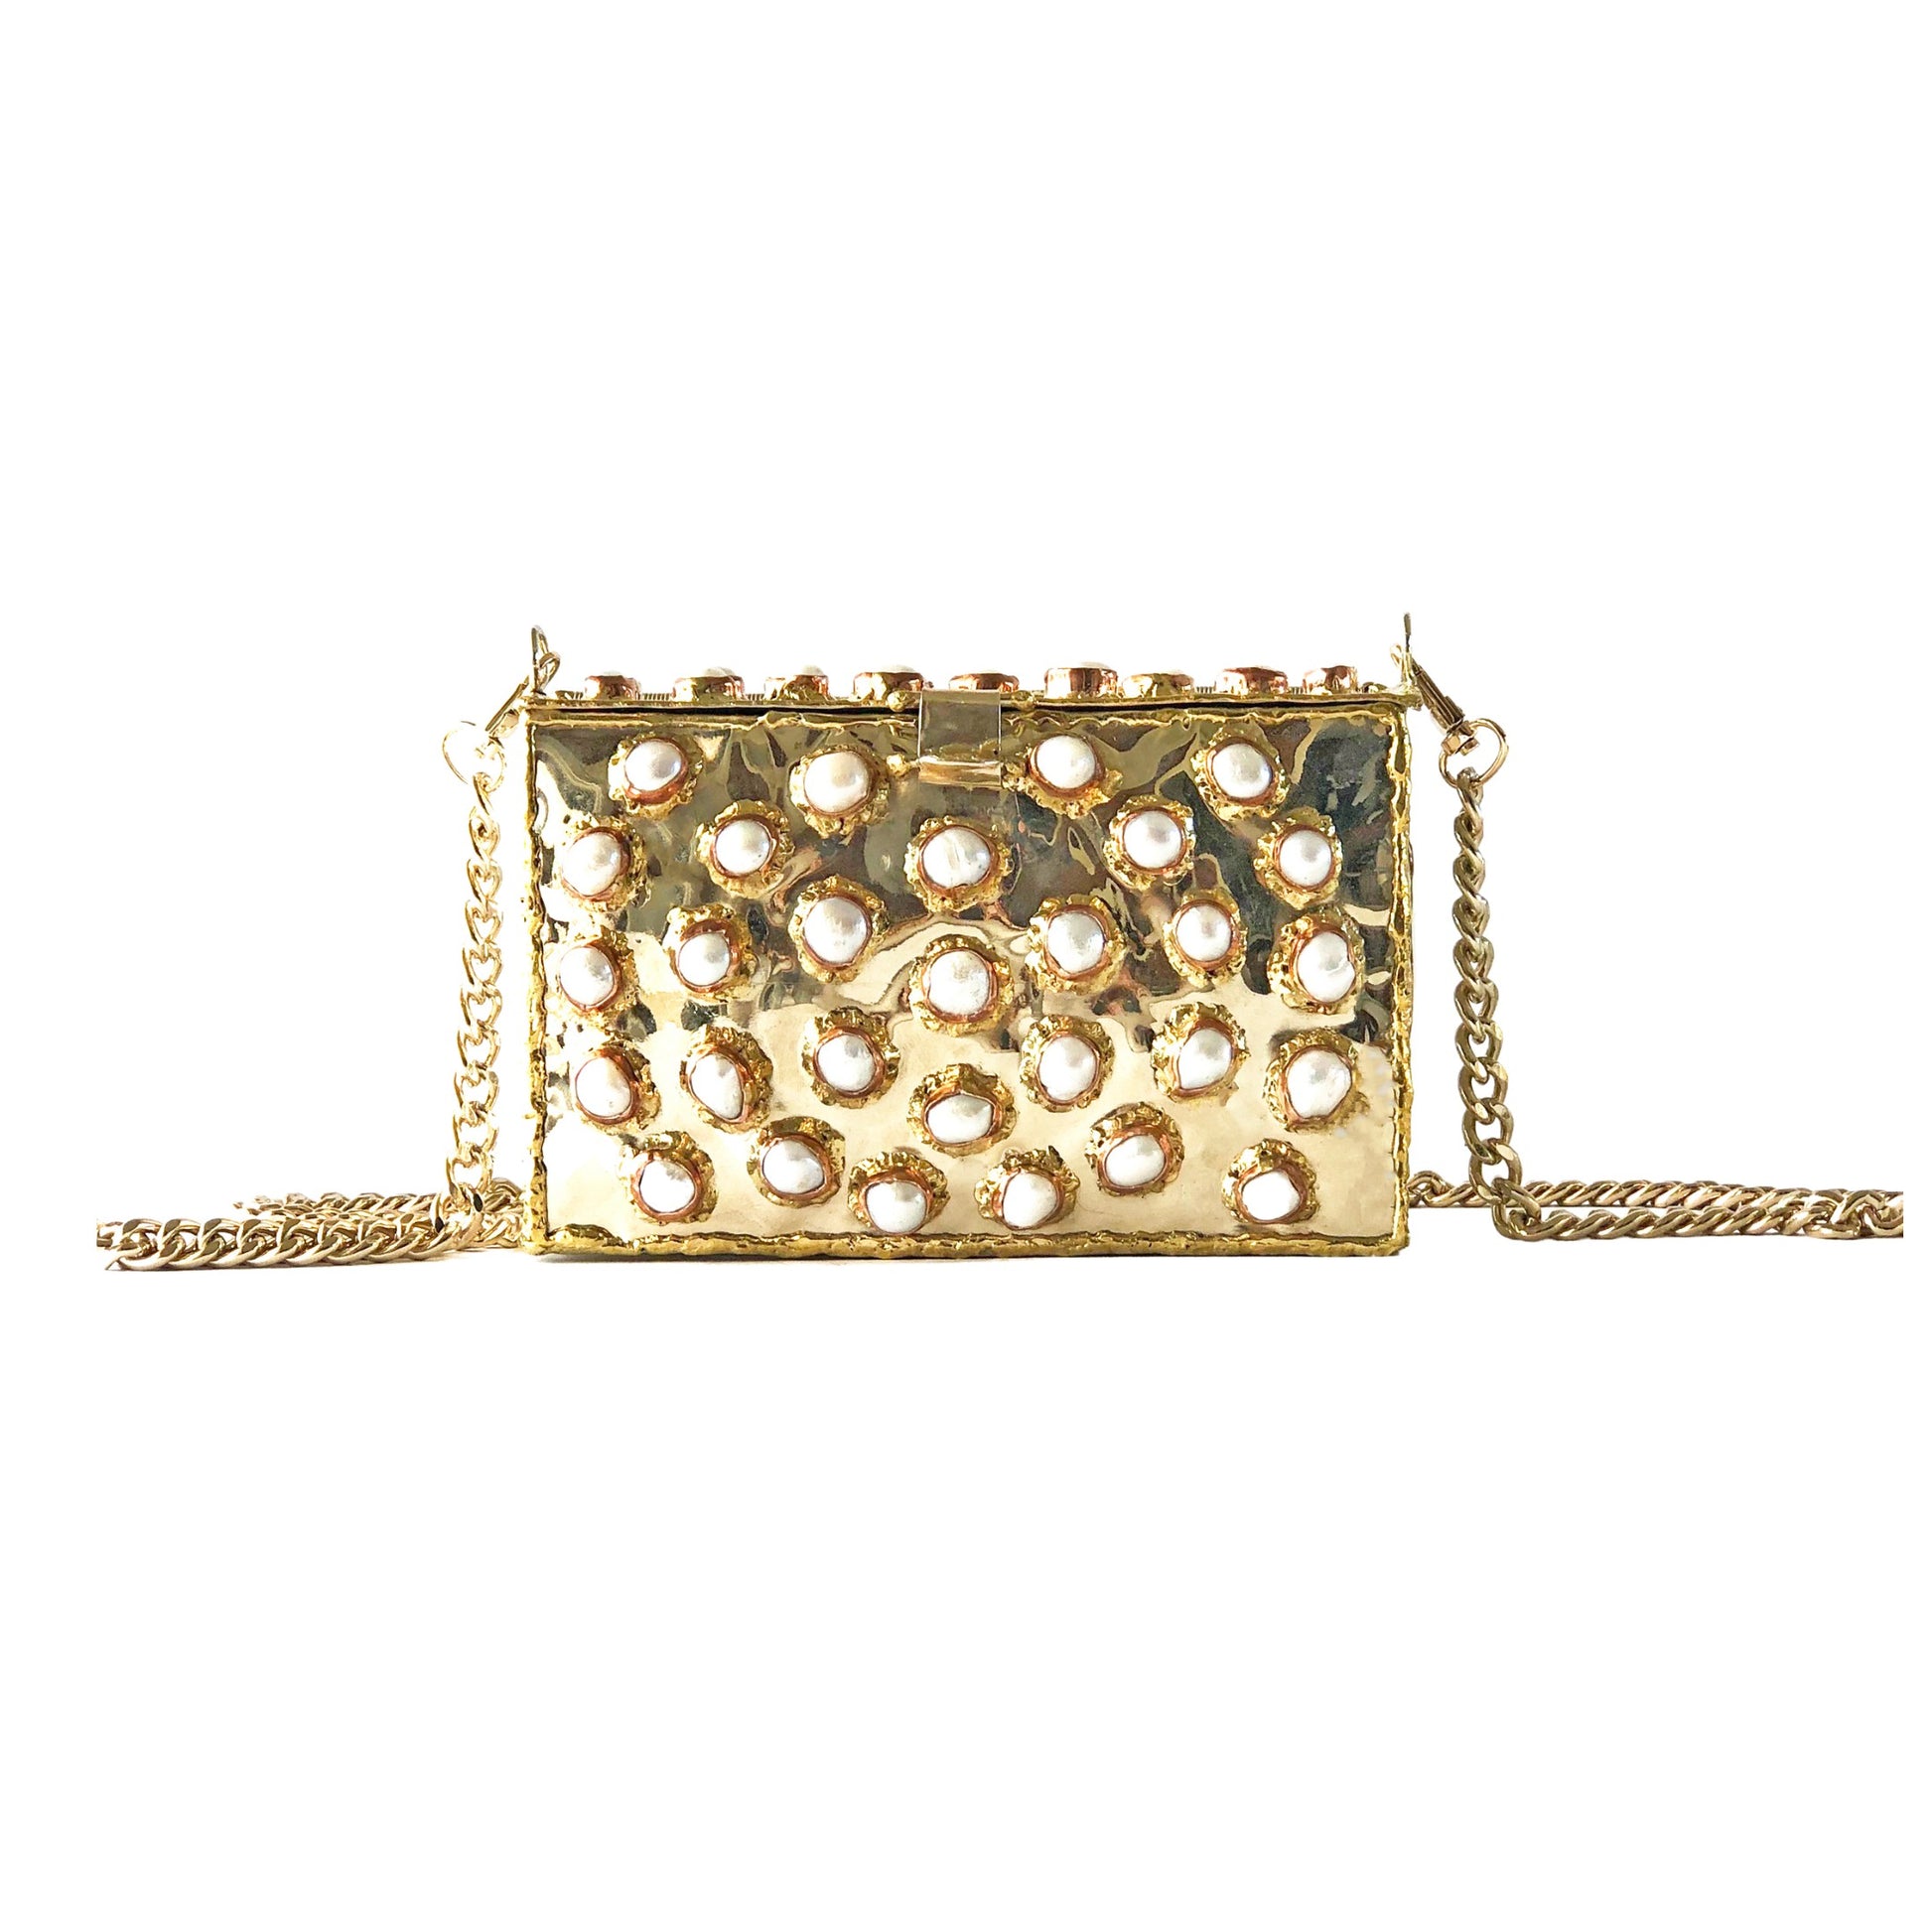 Handcrafted luxury pearls bag